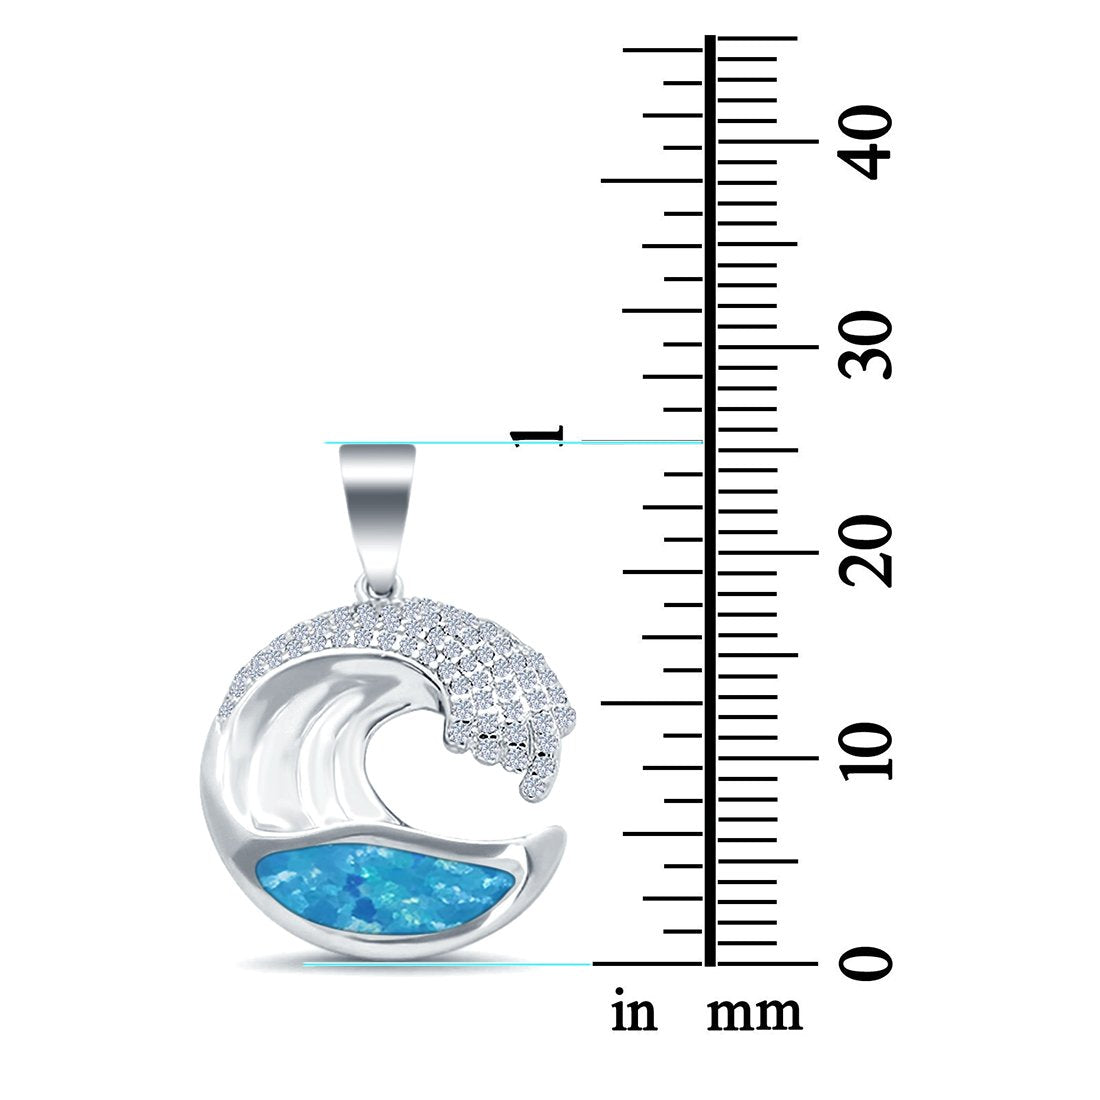 Lab Created Opal Wave Design Simulated CZ 925 Sterling Silver Charm Pendant